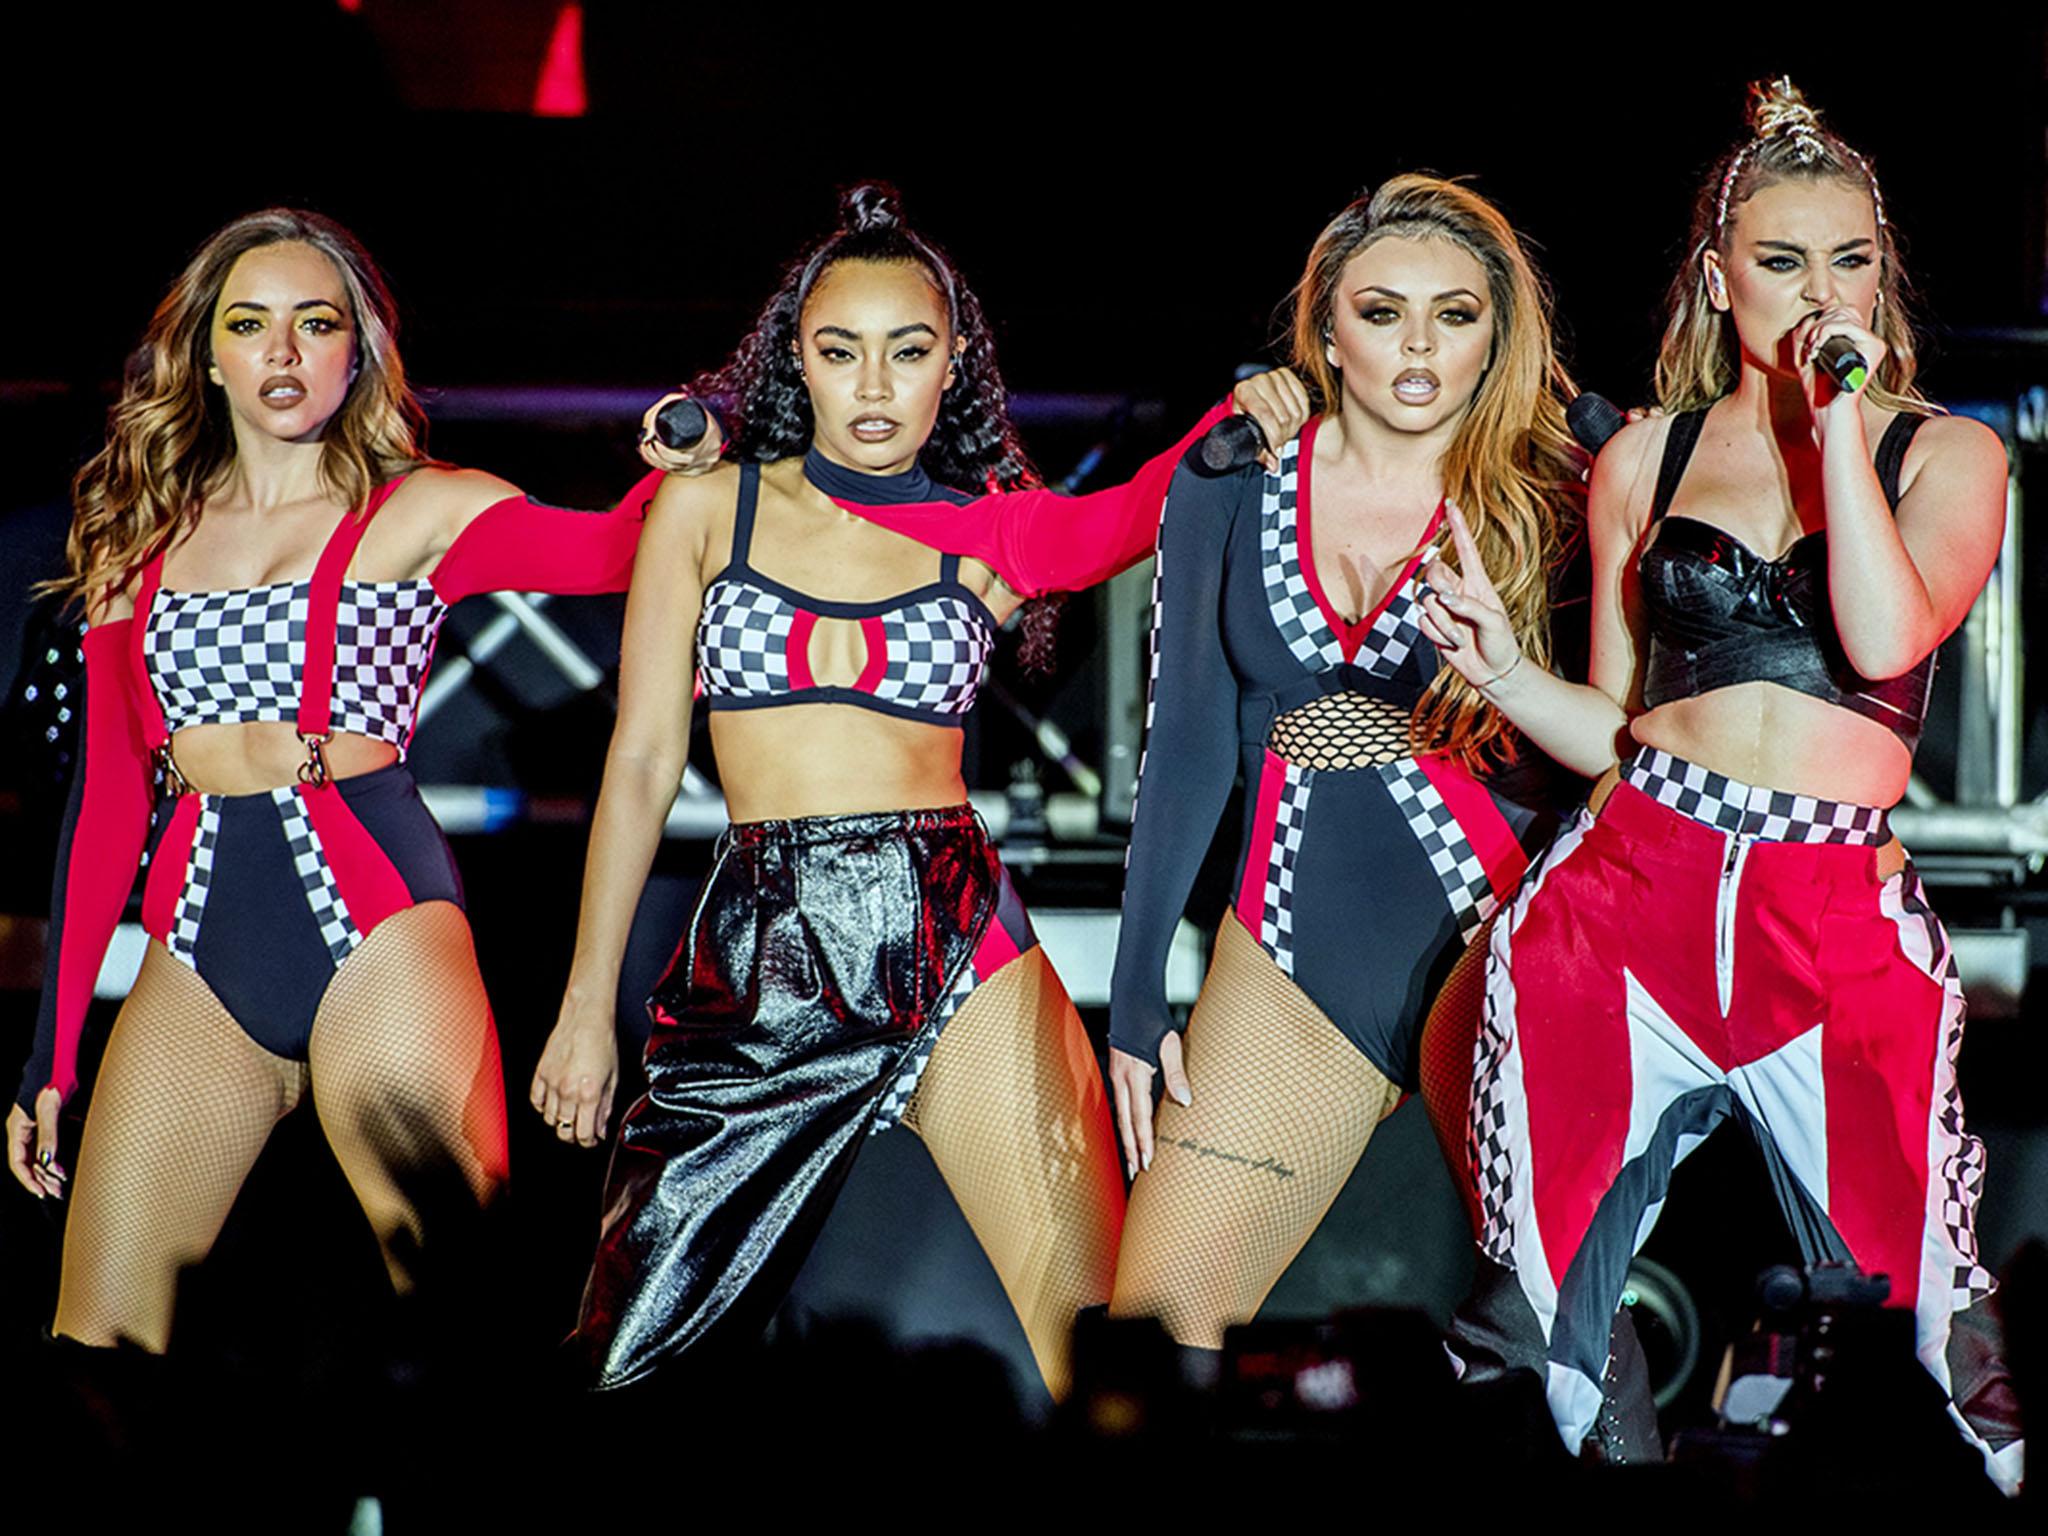 Little Mix dropped by Simon Cowell's record label days before releasing new album